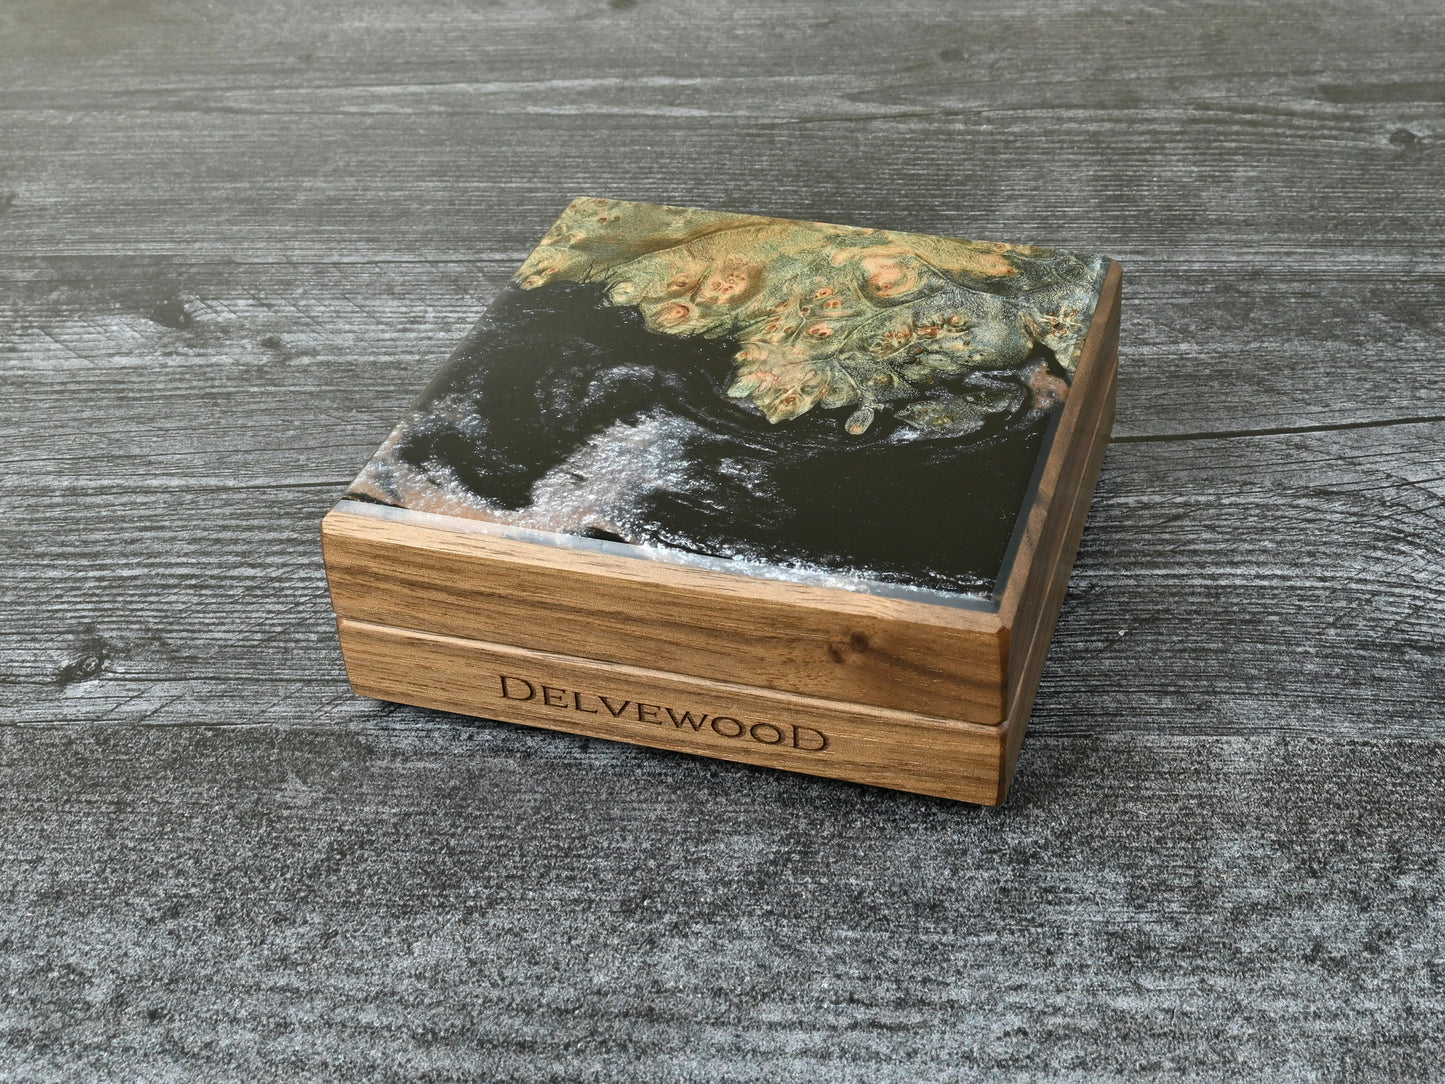 Walnut little delver dice box with green/blue maple burl top veneer and black / pearl white resin. D&D ttrpg.